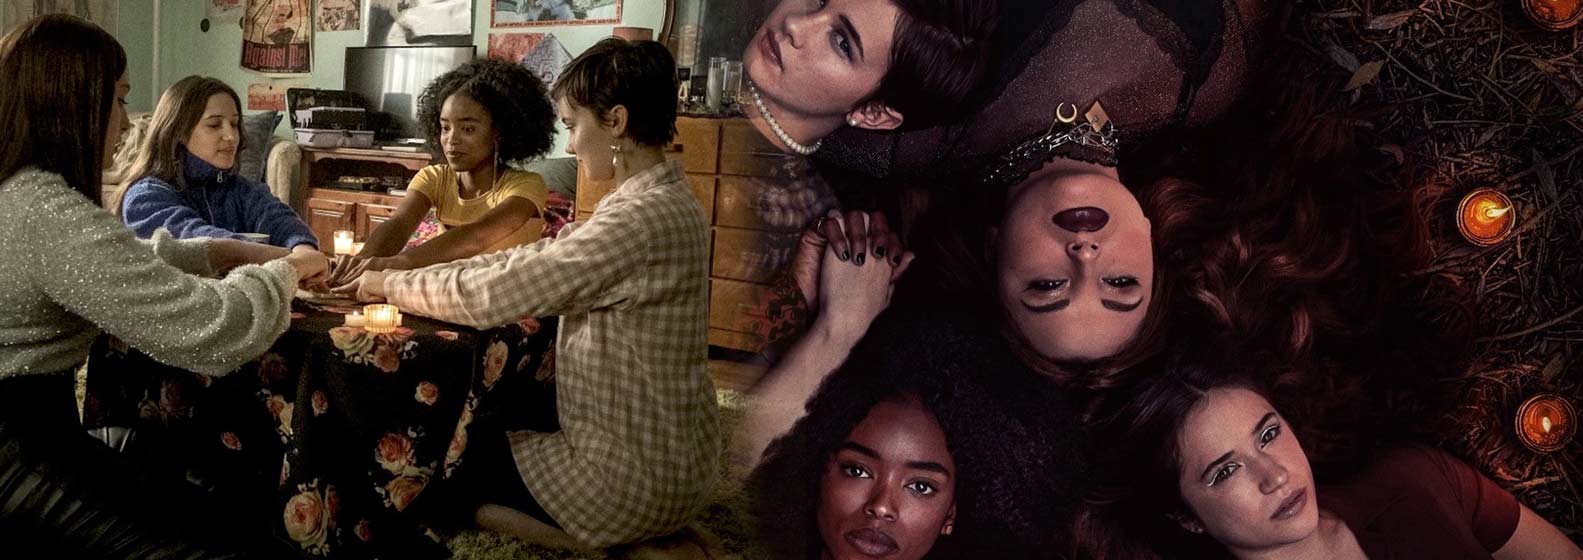 The Craft: Legacy - Header Image